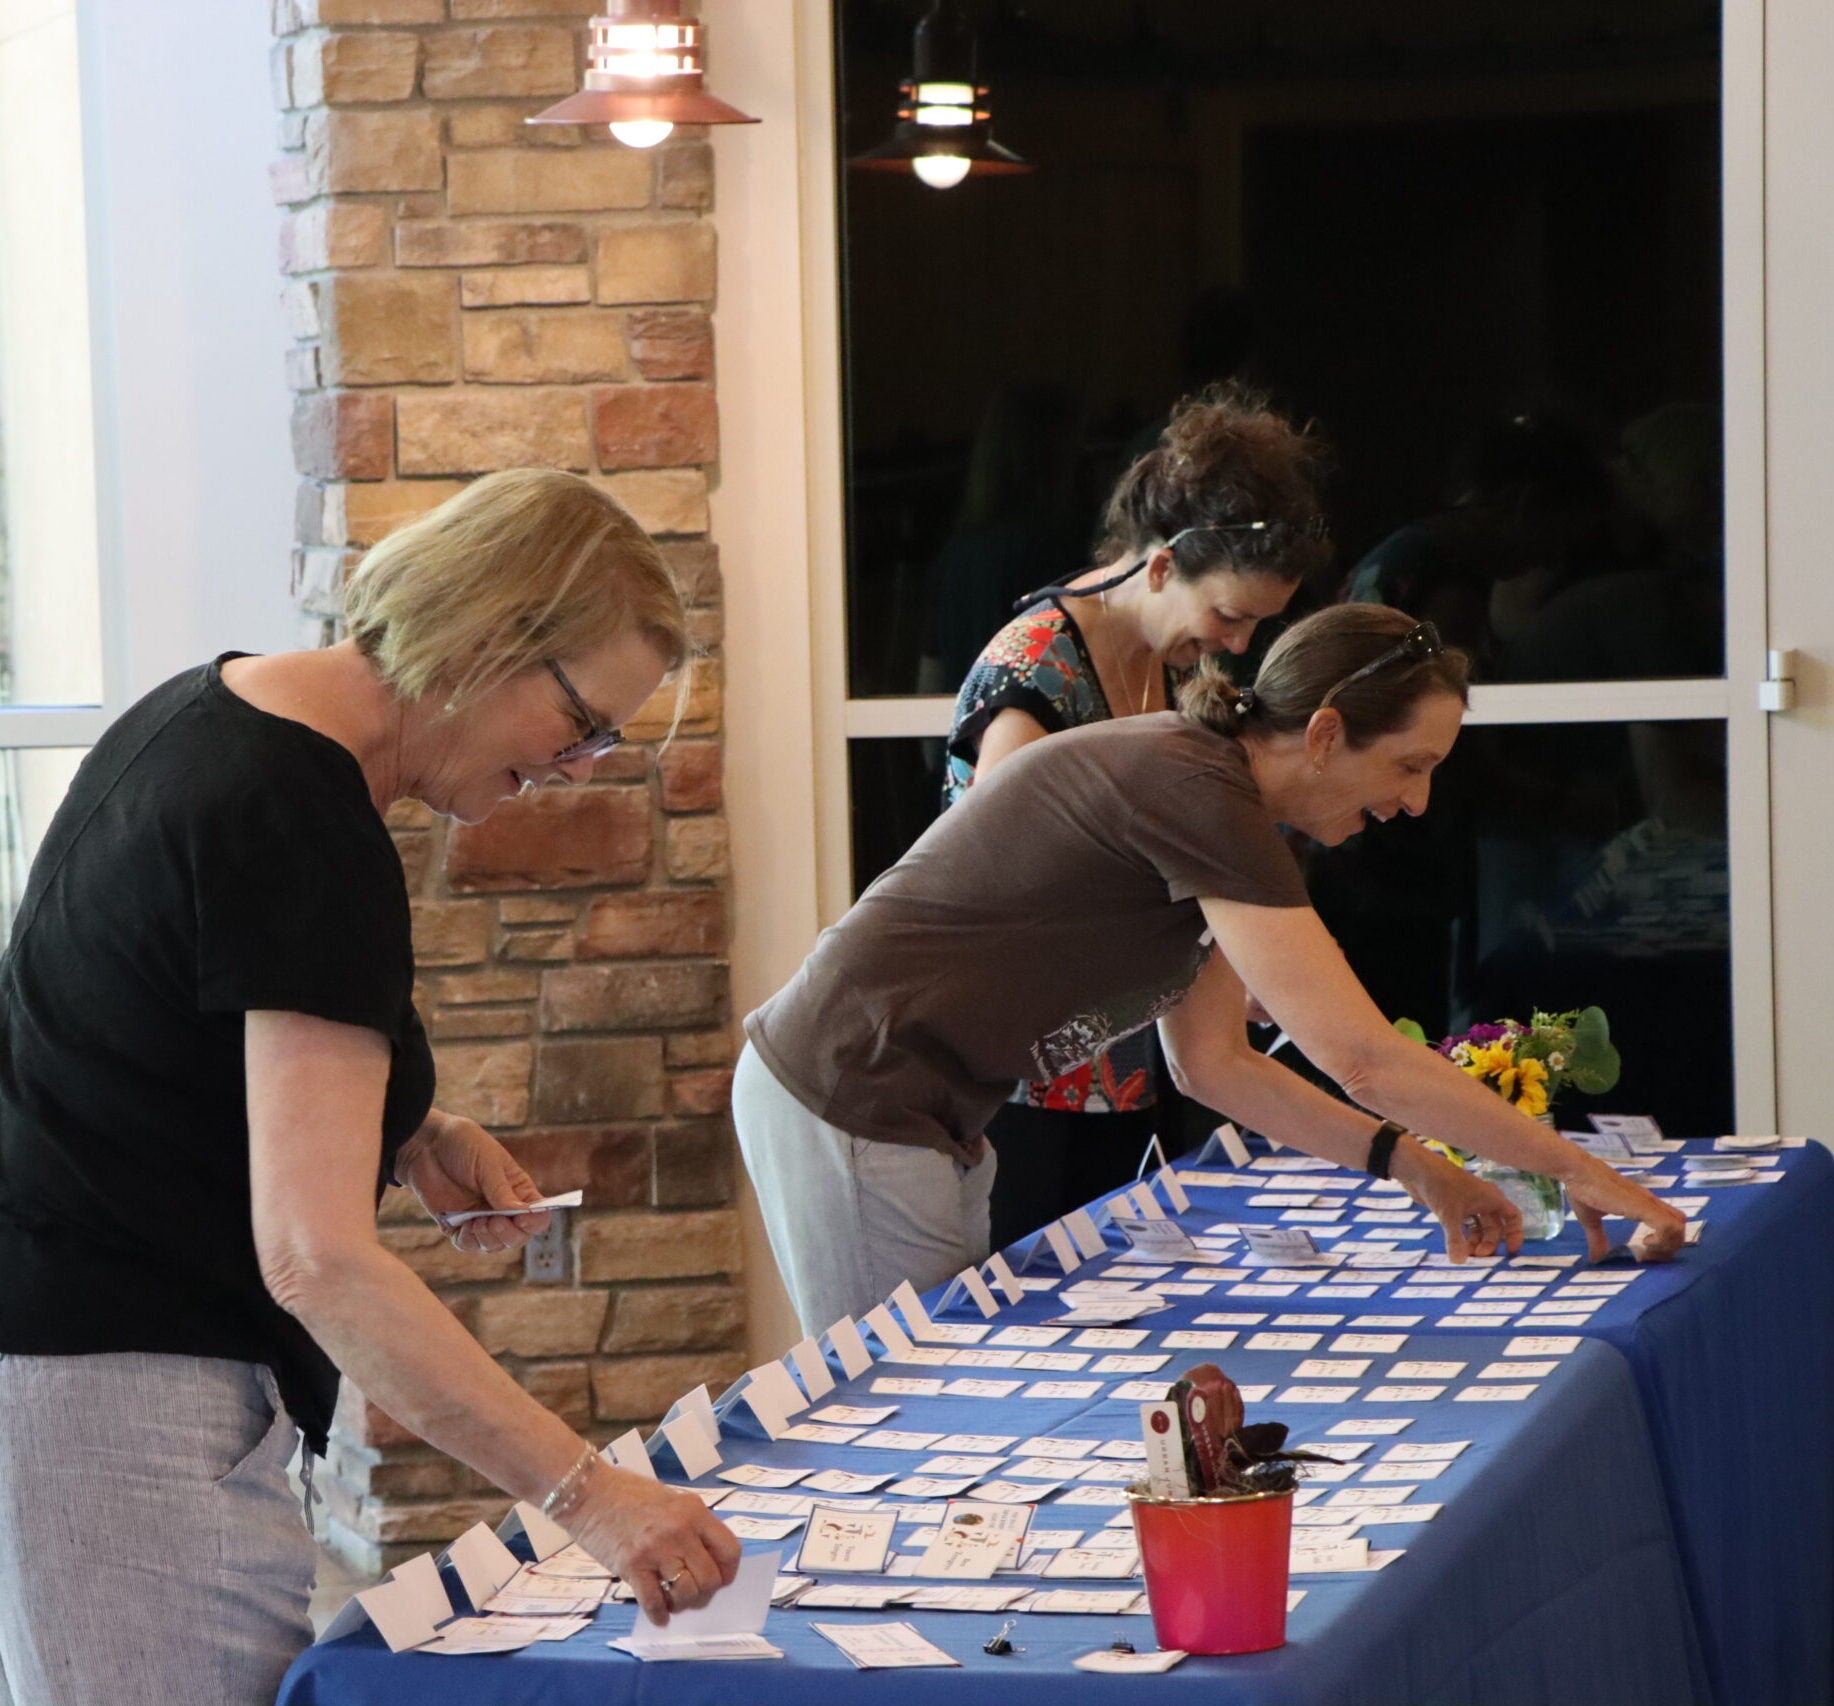 three smiling women work sorting nametags that are laid out on a blue tablecloth